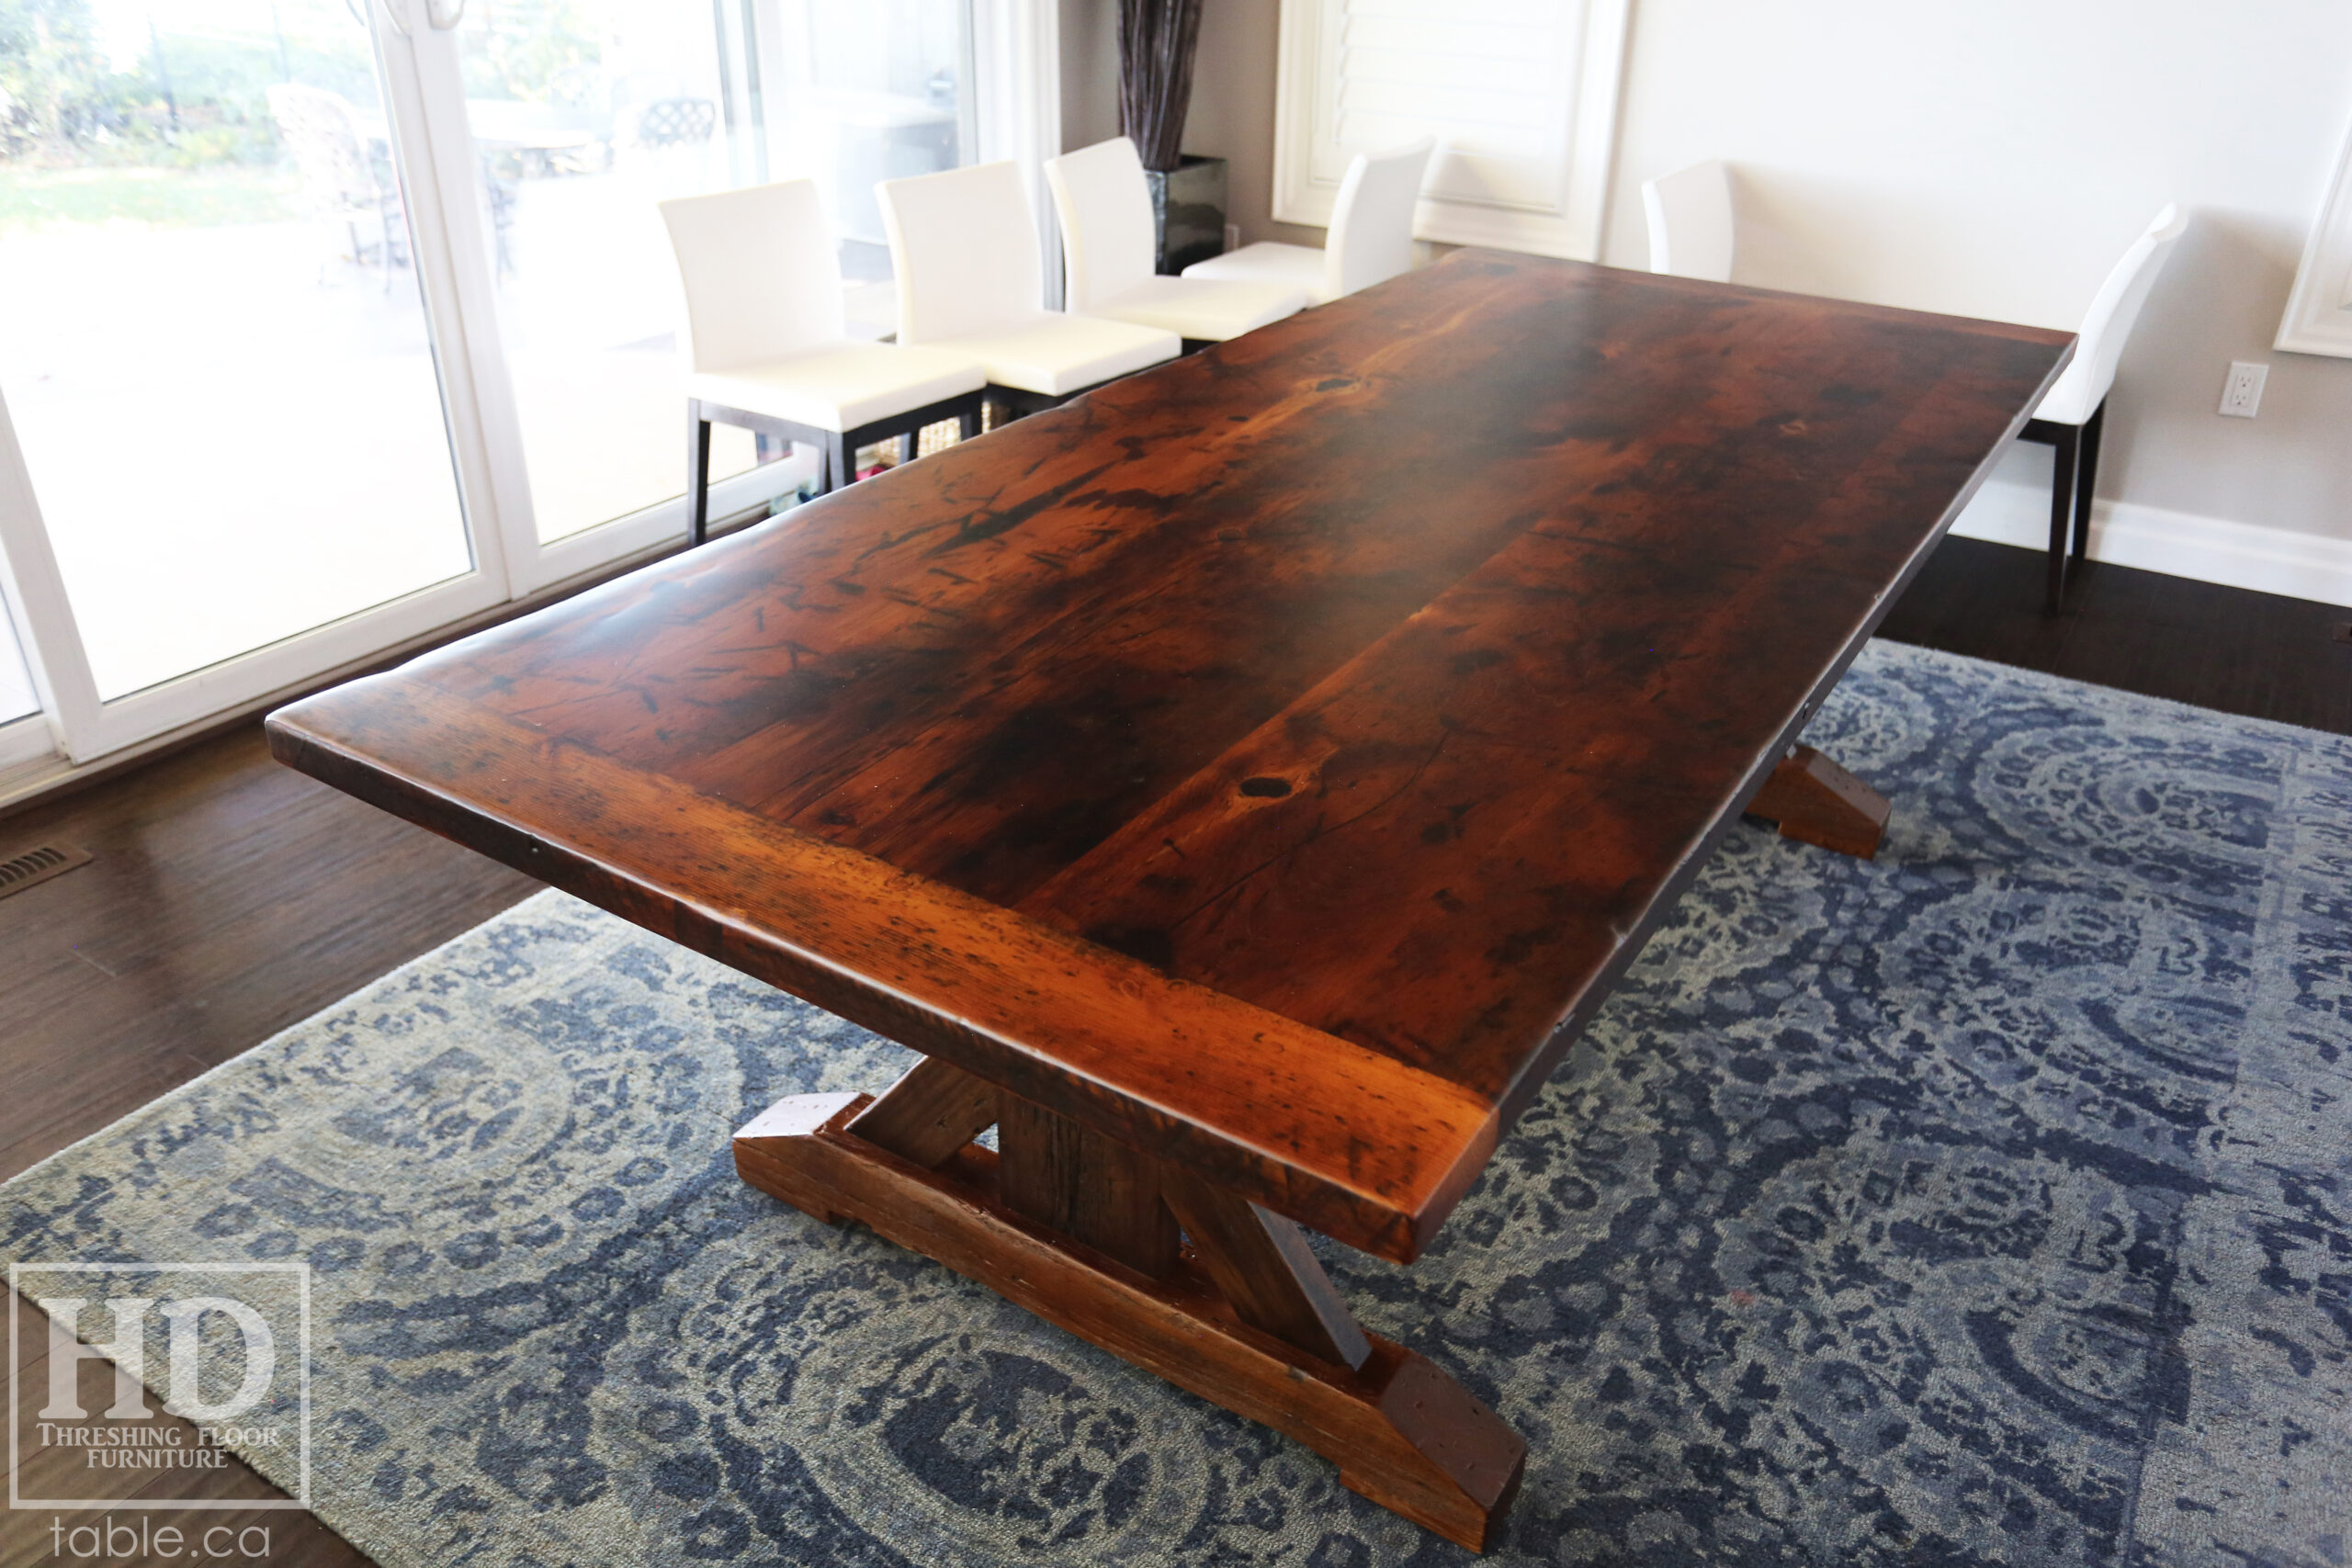 8 ft Reclaimed Ontario Barnwood Table we made for a Sarnia, Ontario home - 42” wide – Sawbuck Base - Reclaimed Hemlock Threshing Floor Construction – Original edges & distressing maintained – Premium epoxy + matte polyurethane finish - www.table.ca